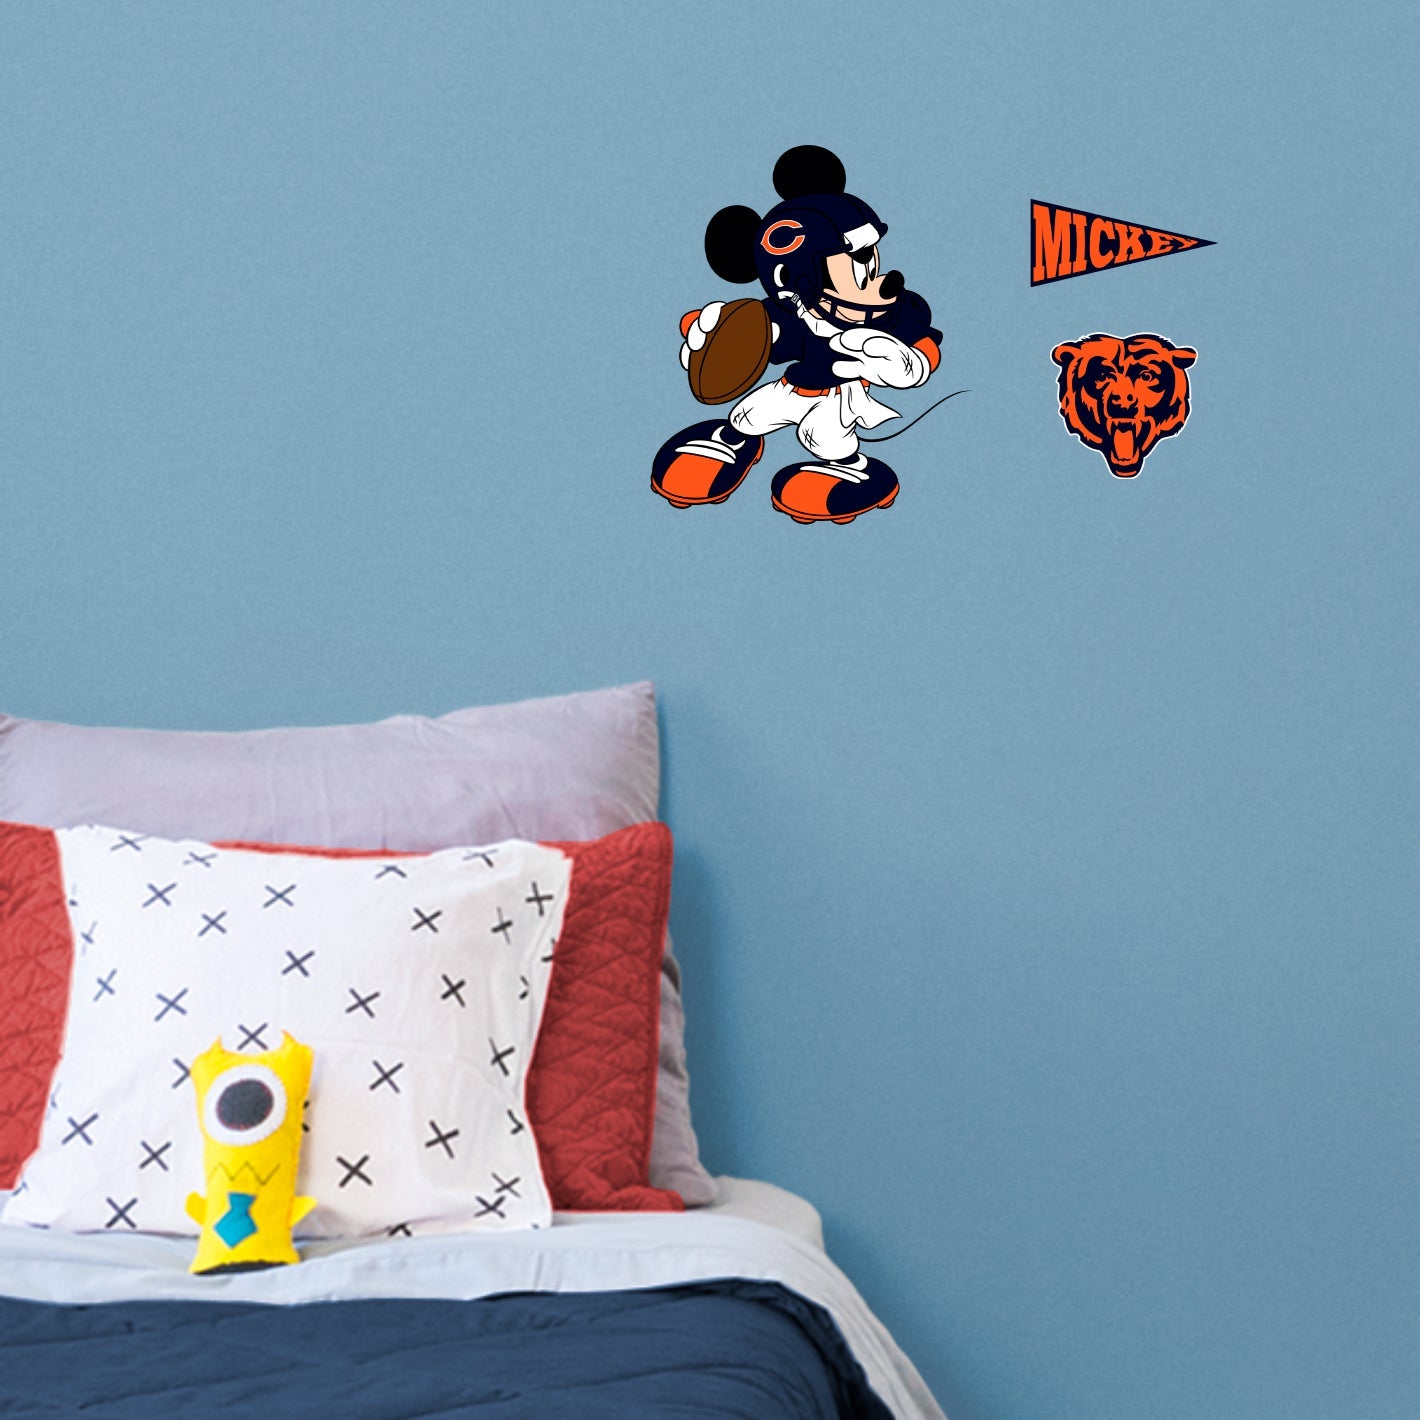 Chicago Bears: Mickey Mouse - Officially Licensed NFL Removable Adhesive Decal